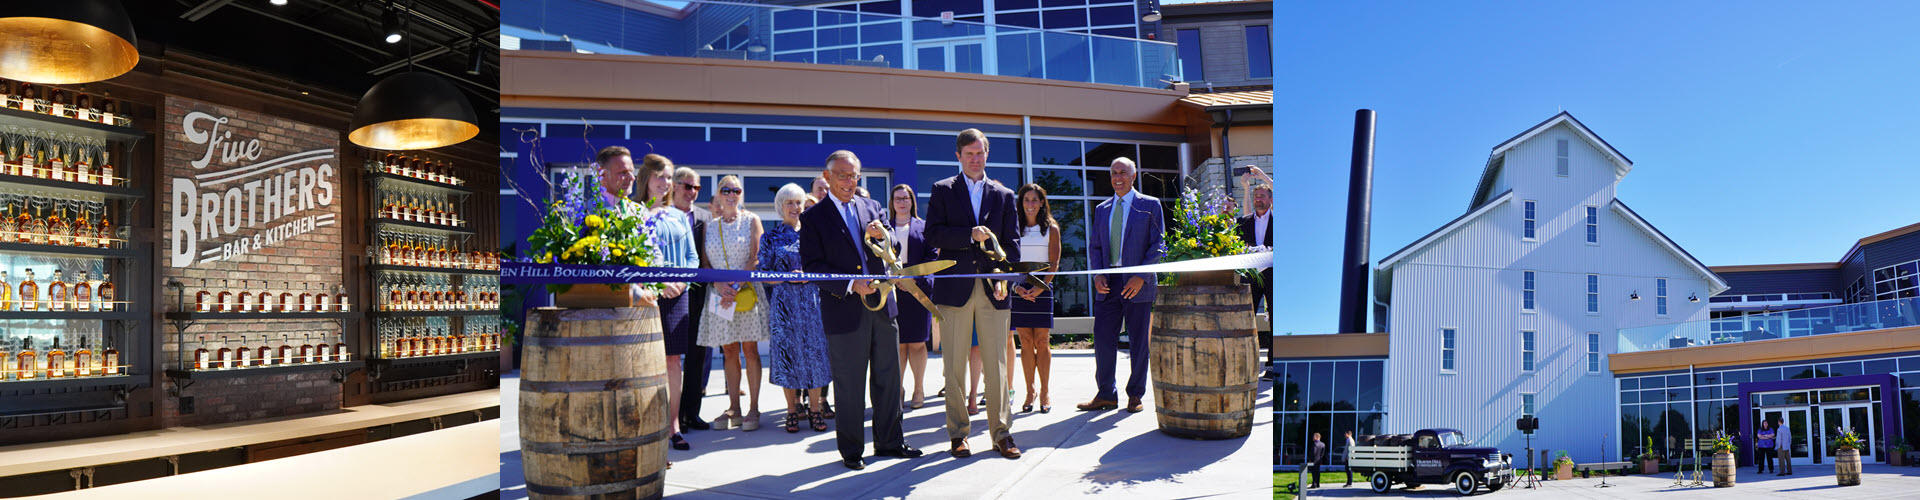 Heaven Hill Bourbon Experience - Visitor Center Ribbon Cutting and Grand Opening